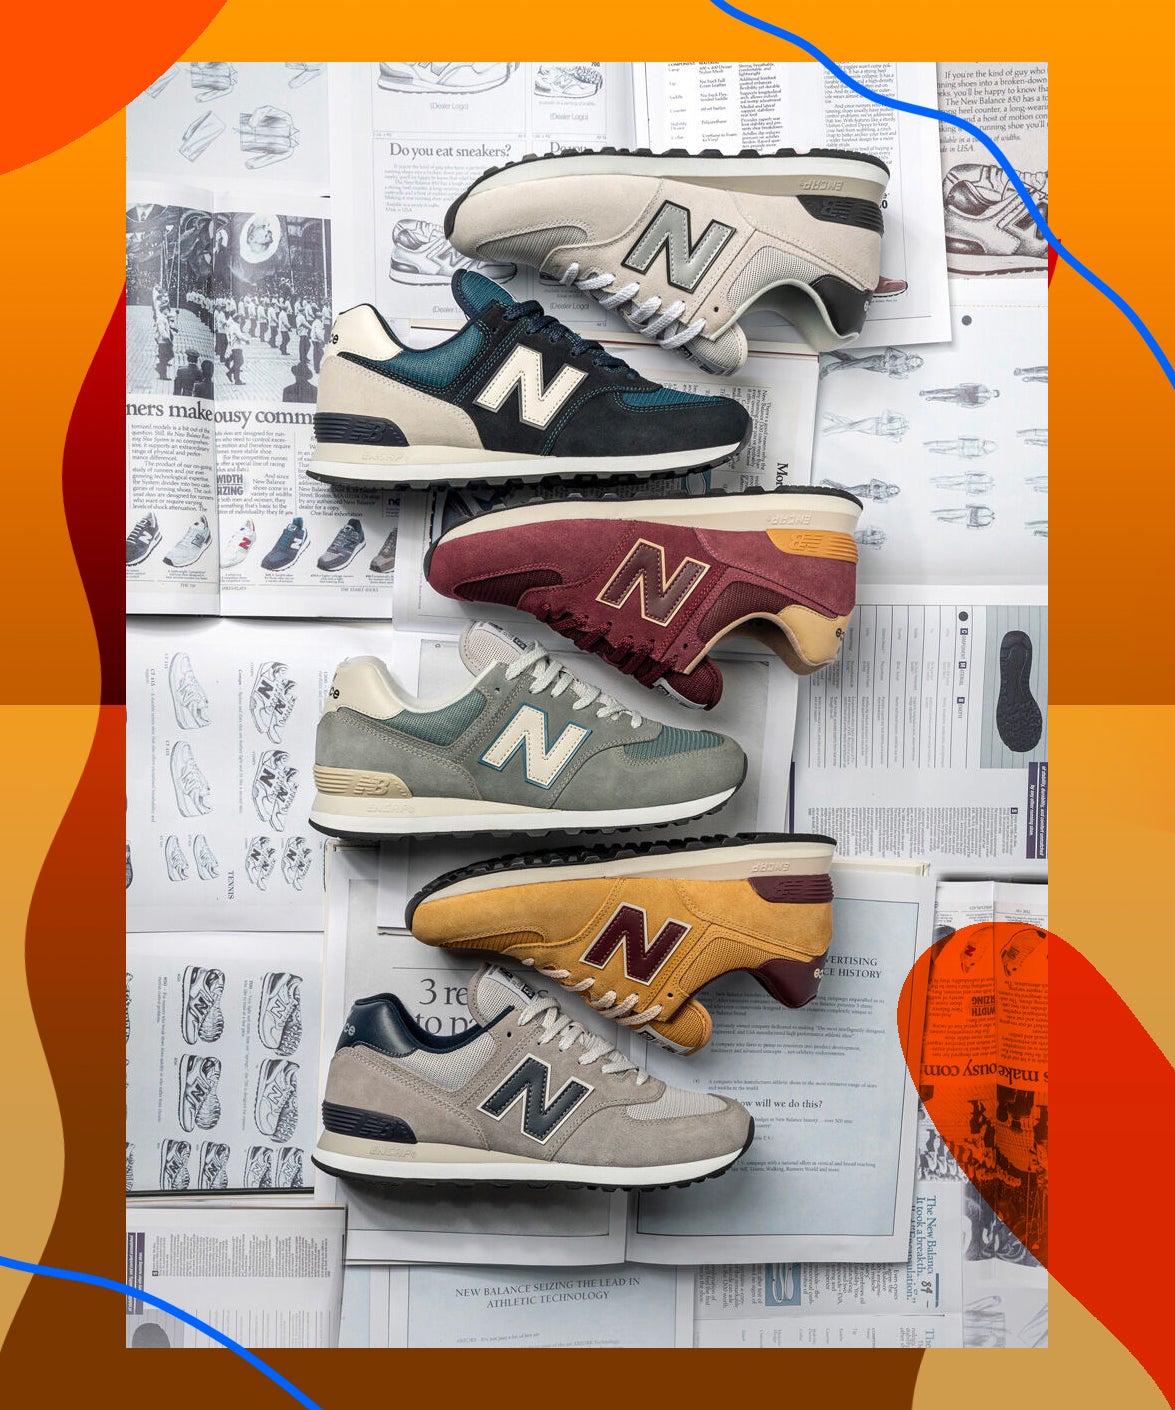 The Best New Balance Sneakers According 